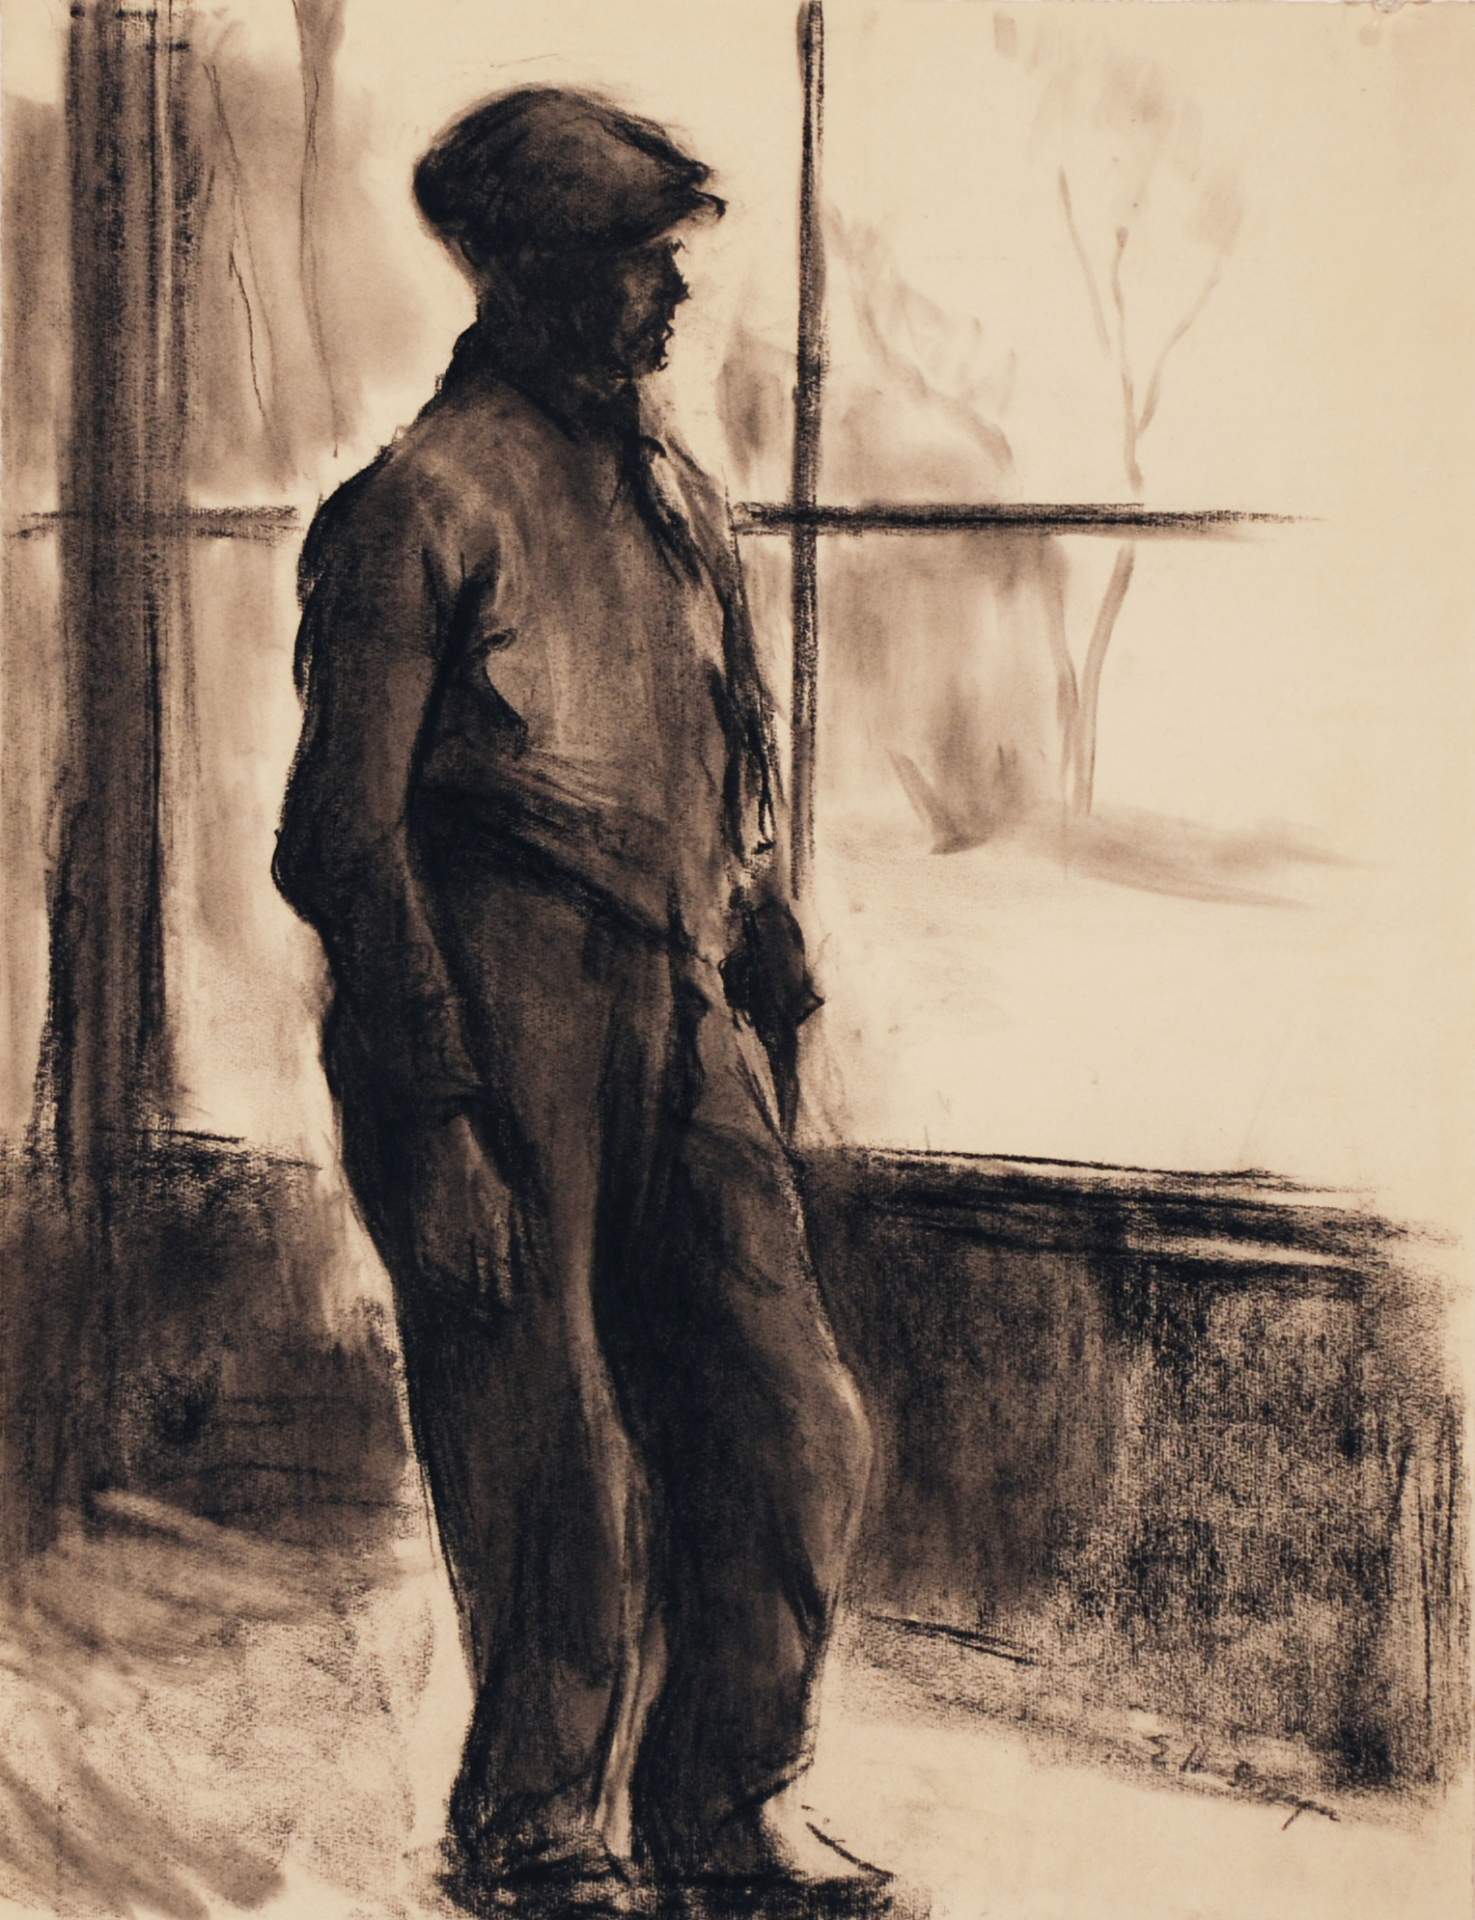 Untitled [standing man at window]